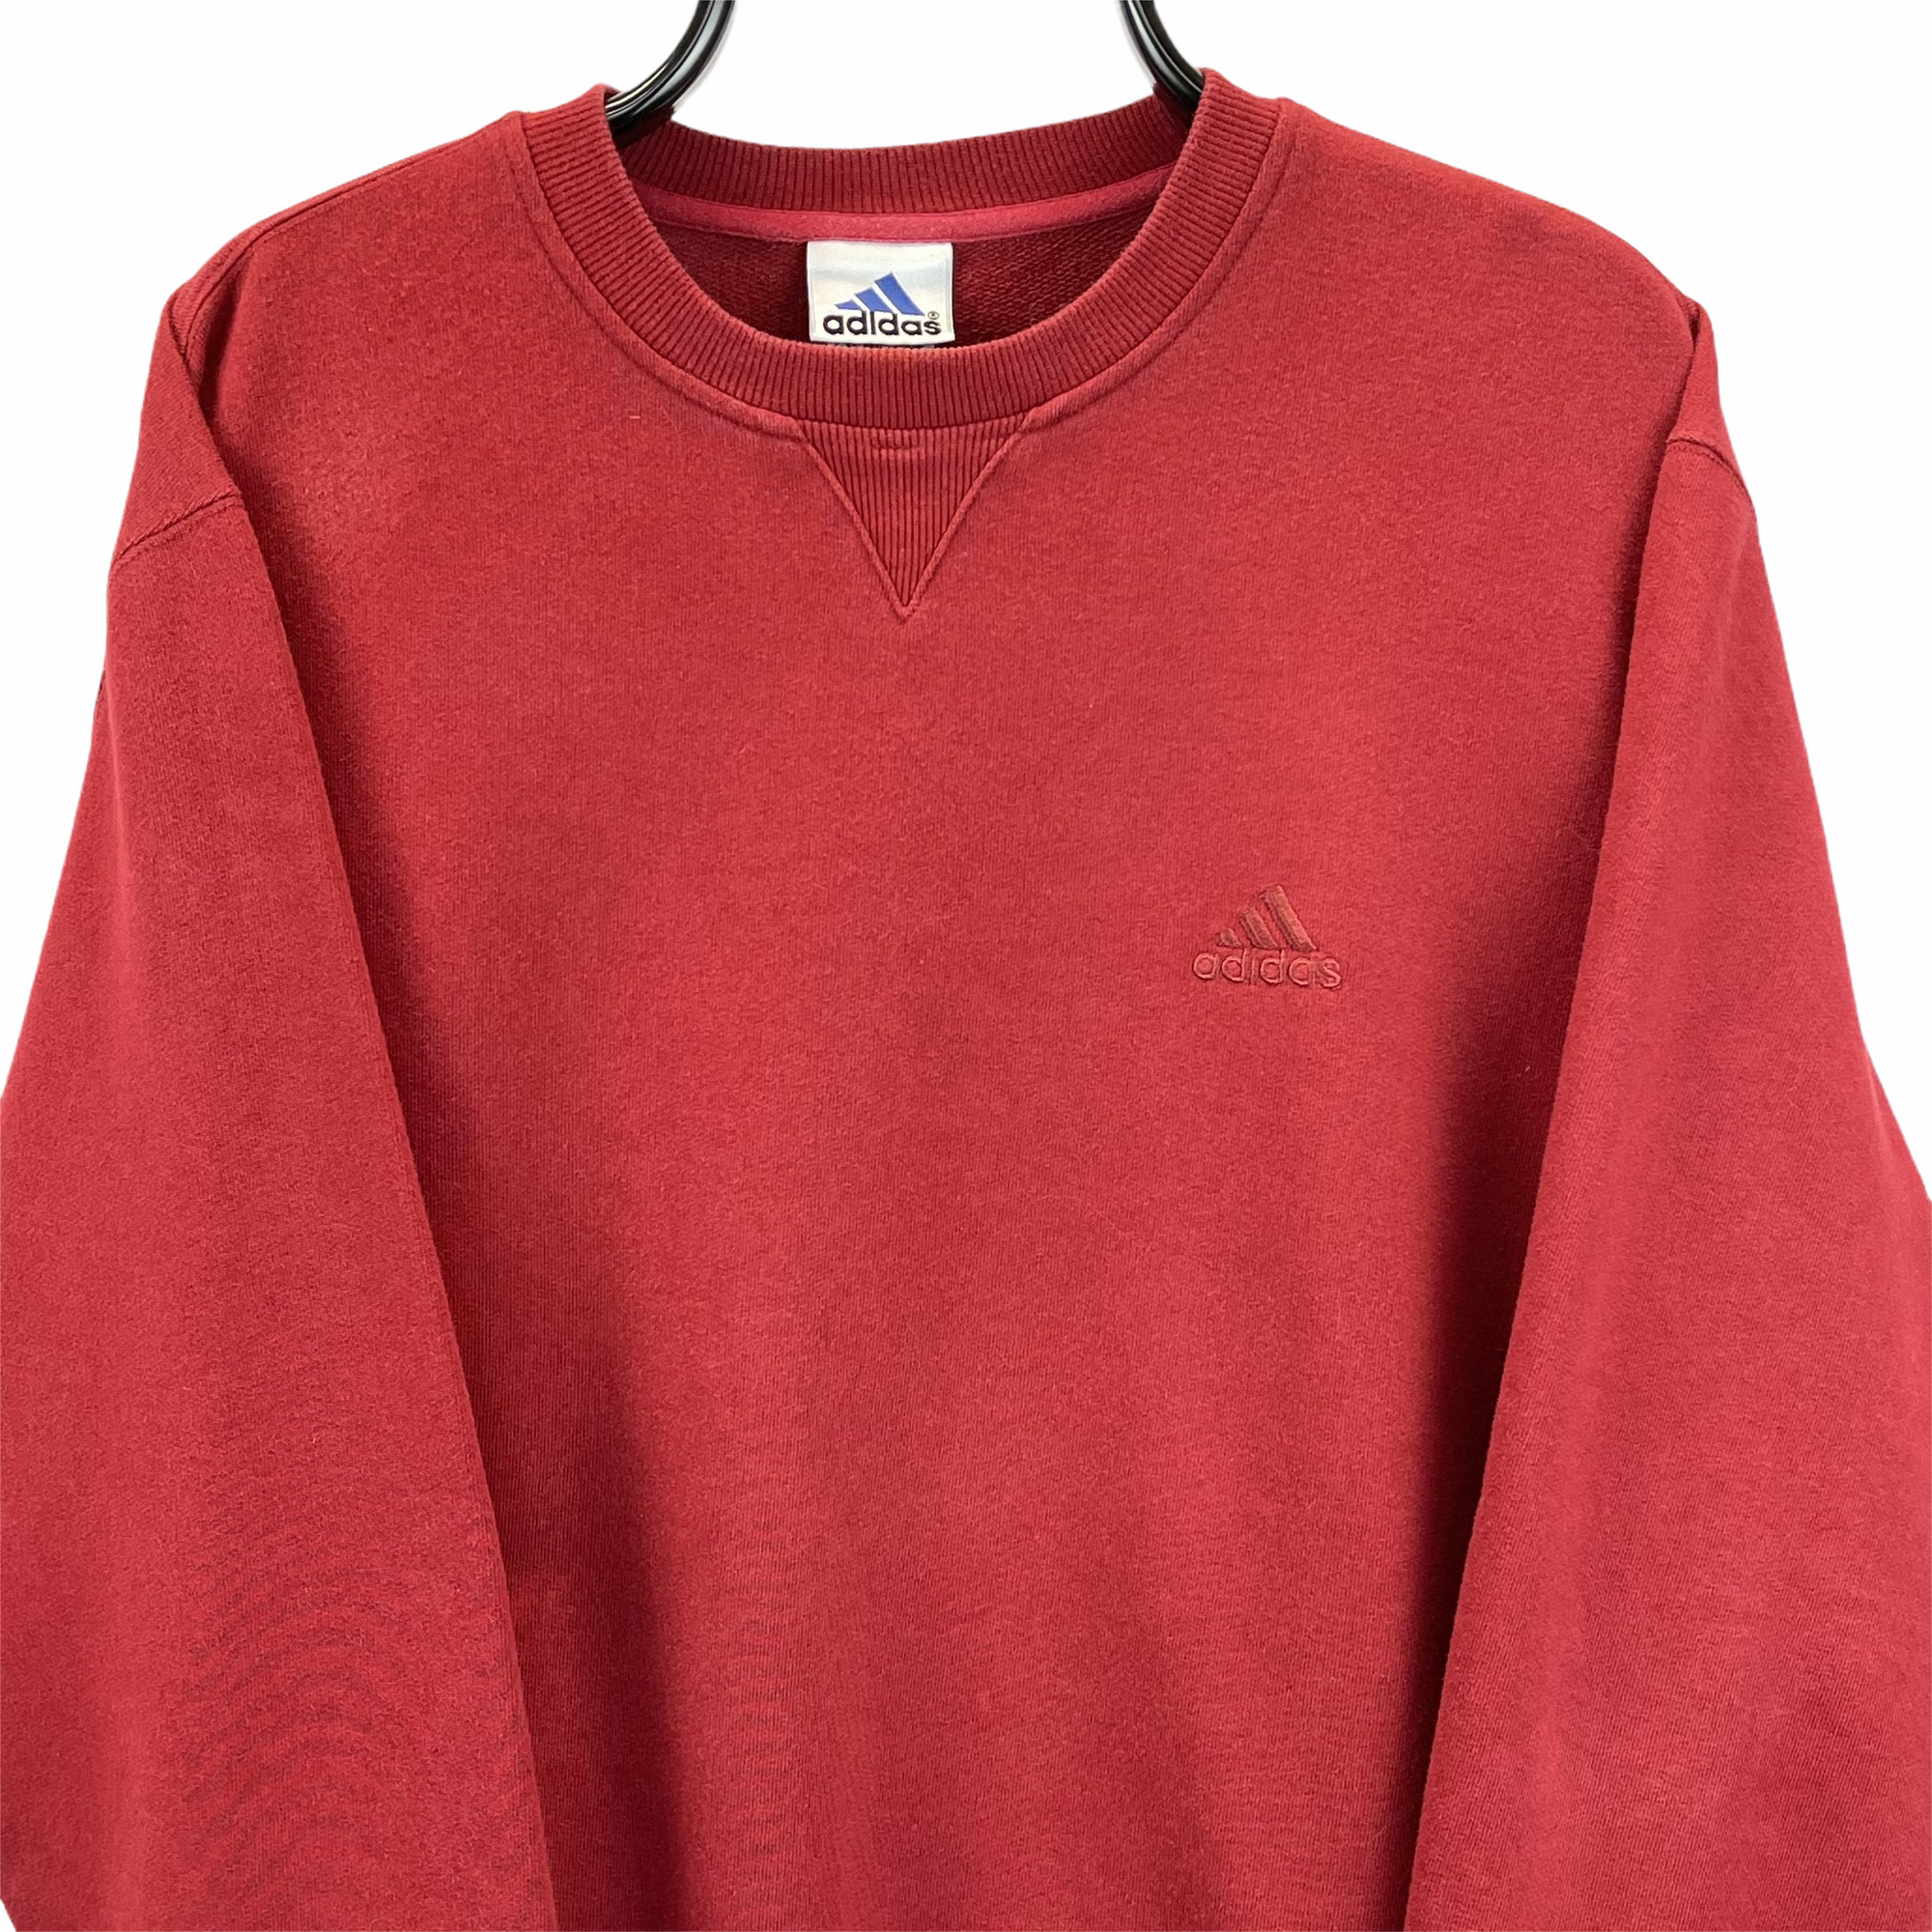 VINTAGE 90S ADIDAS EMBROIDERED SMALL LOGO SWEATSHIRT IN RED - MEN'S LARGE/WOMEN'S XL